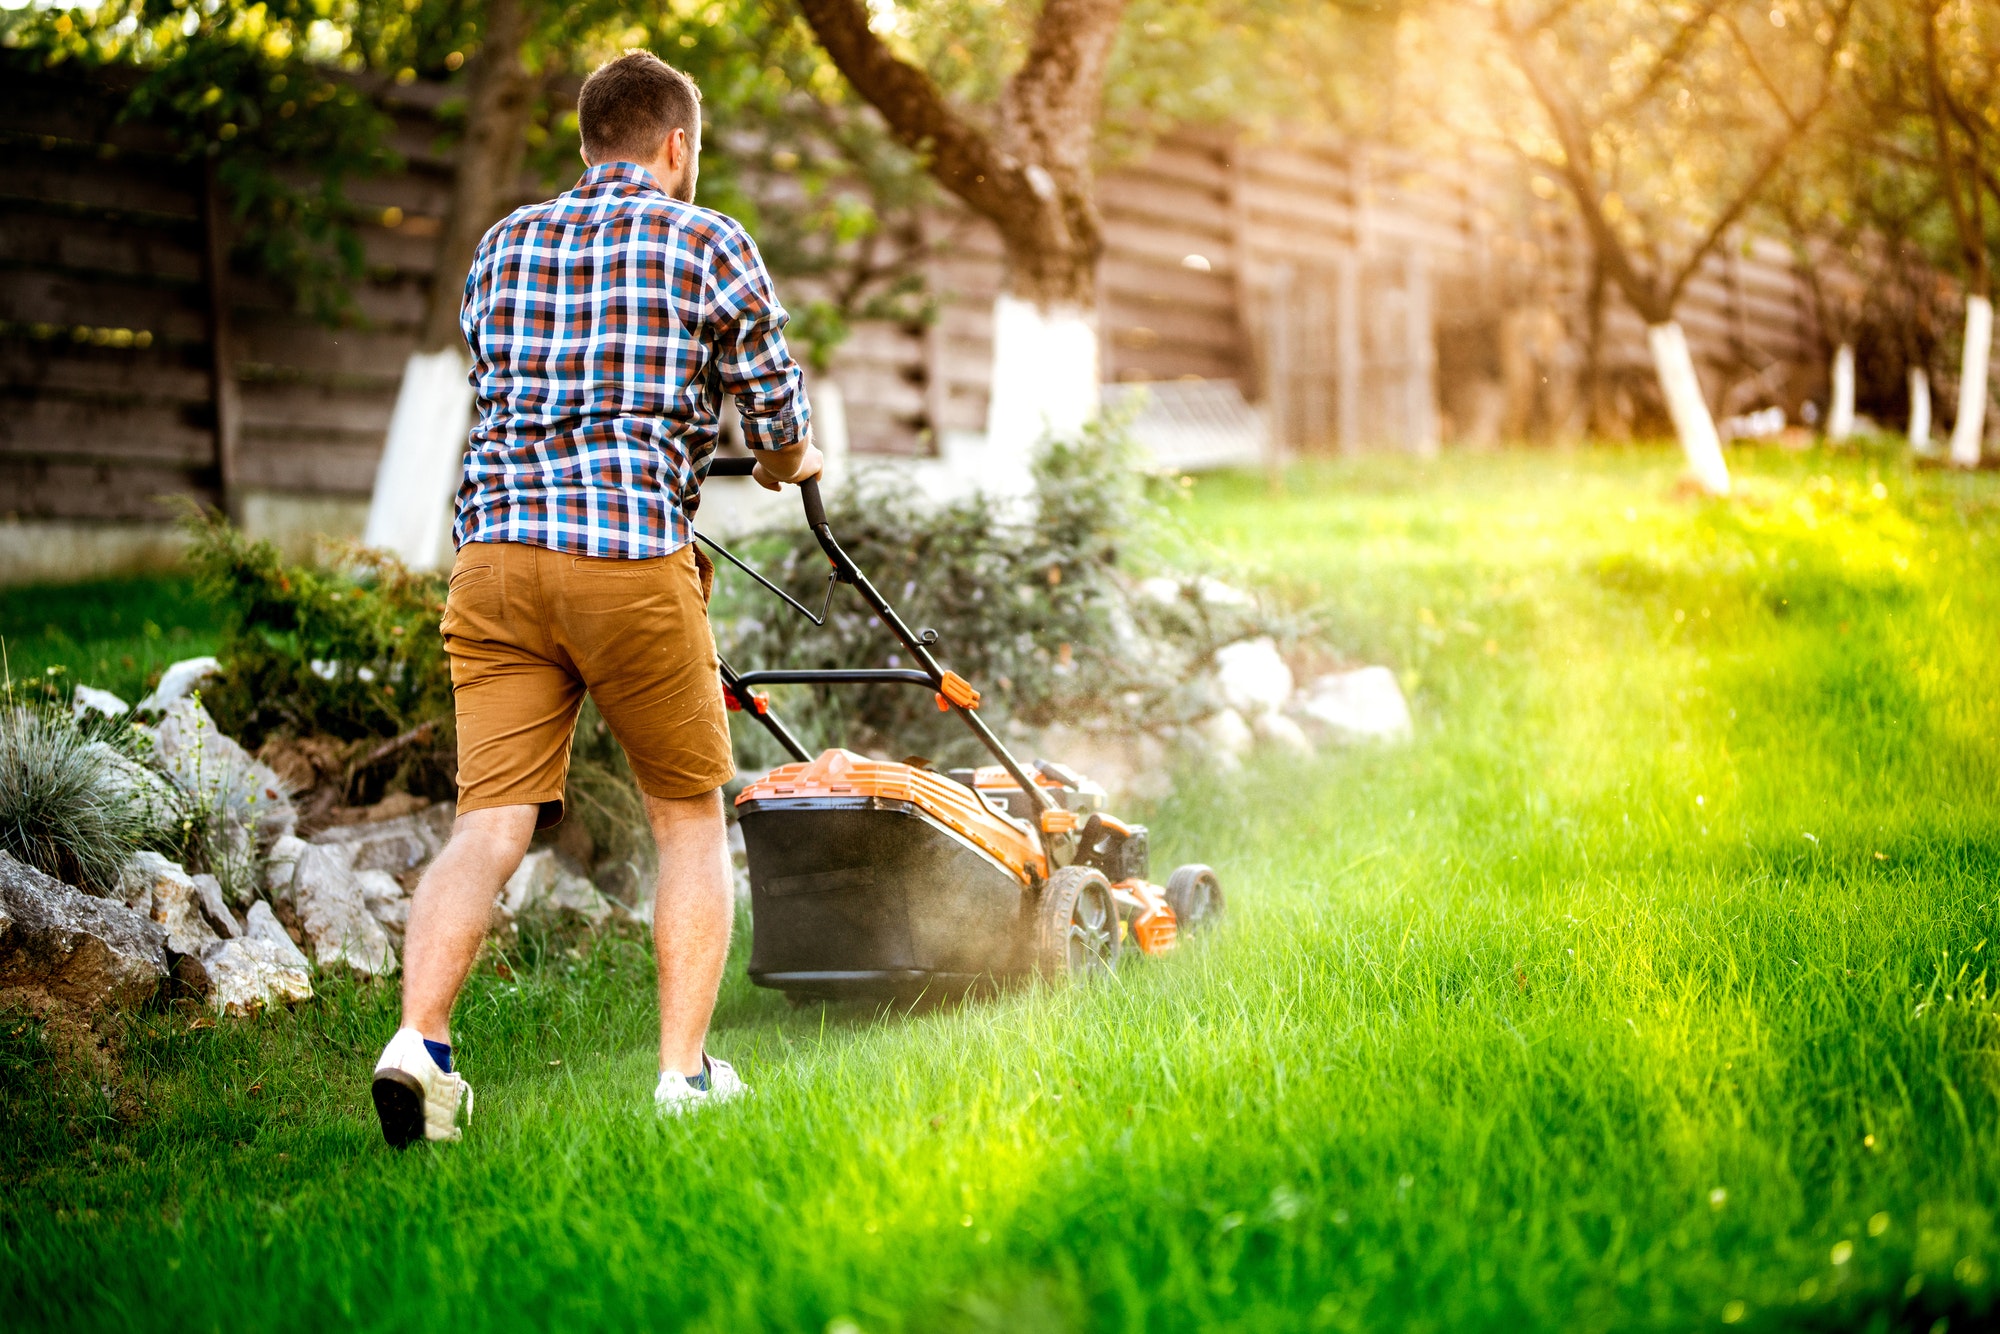 Gardener mowing the lawn using a gasoline powered device, a professional lawn mower